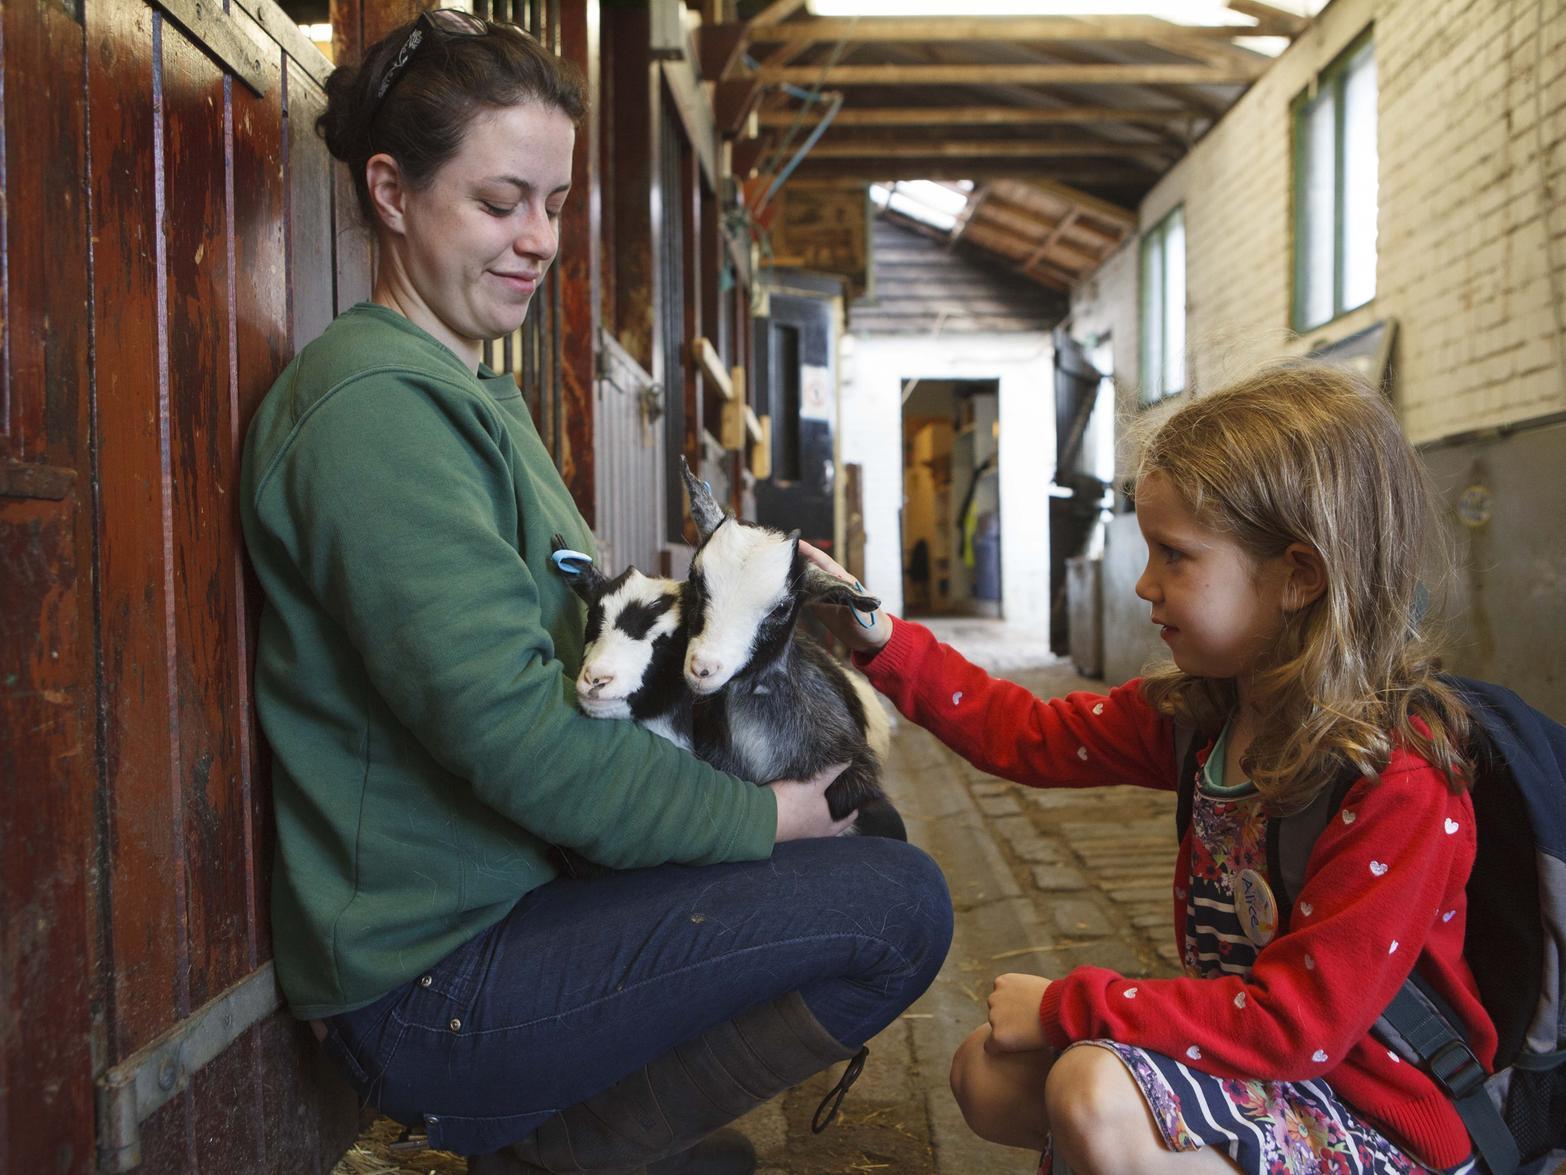 The farm has been a favourite place to visit for hundreds of thousands of families and children over the years.